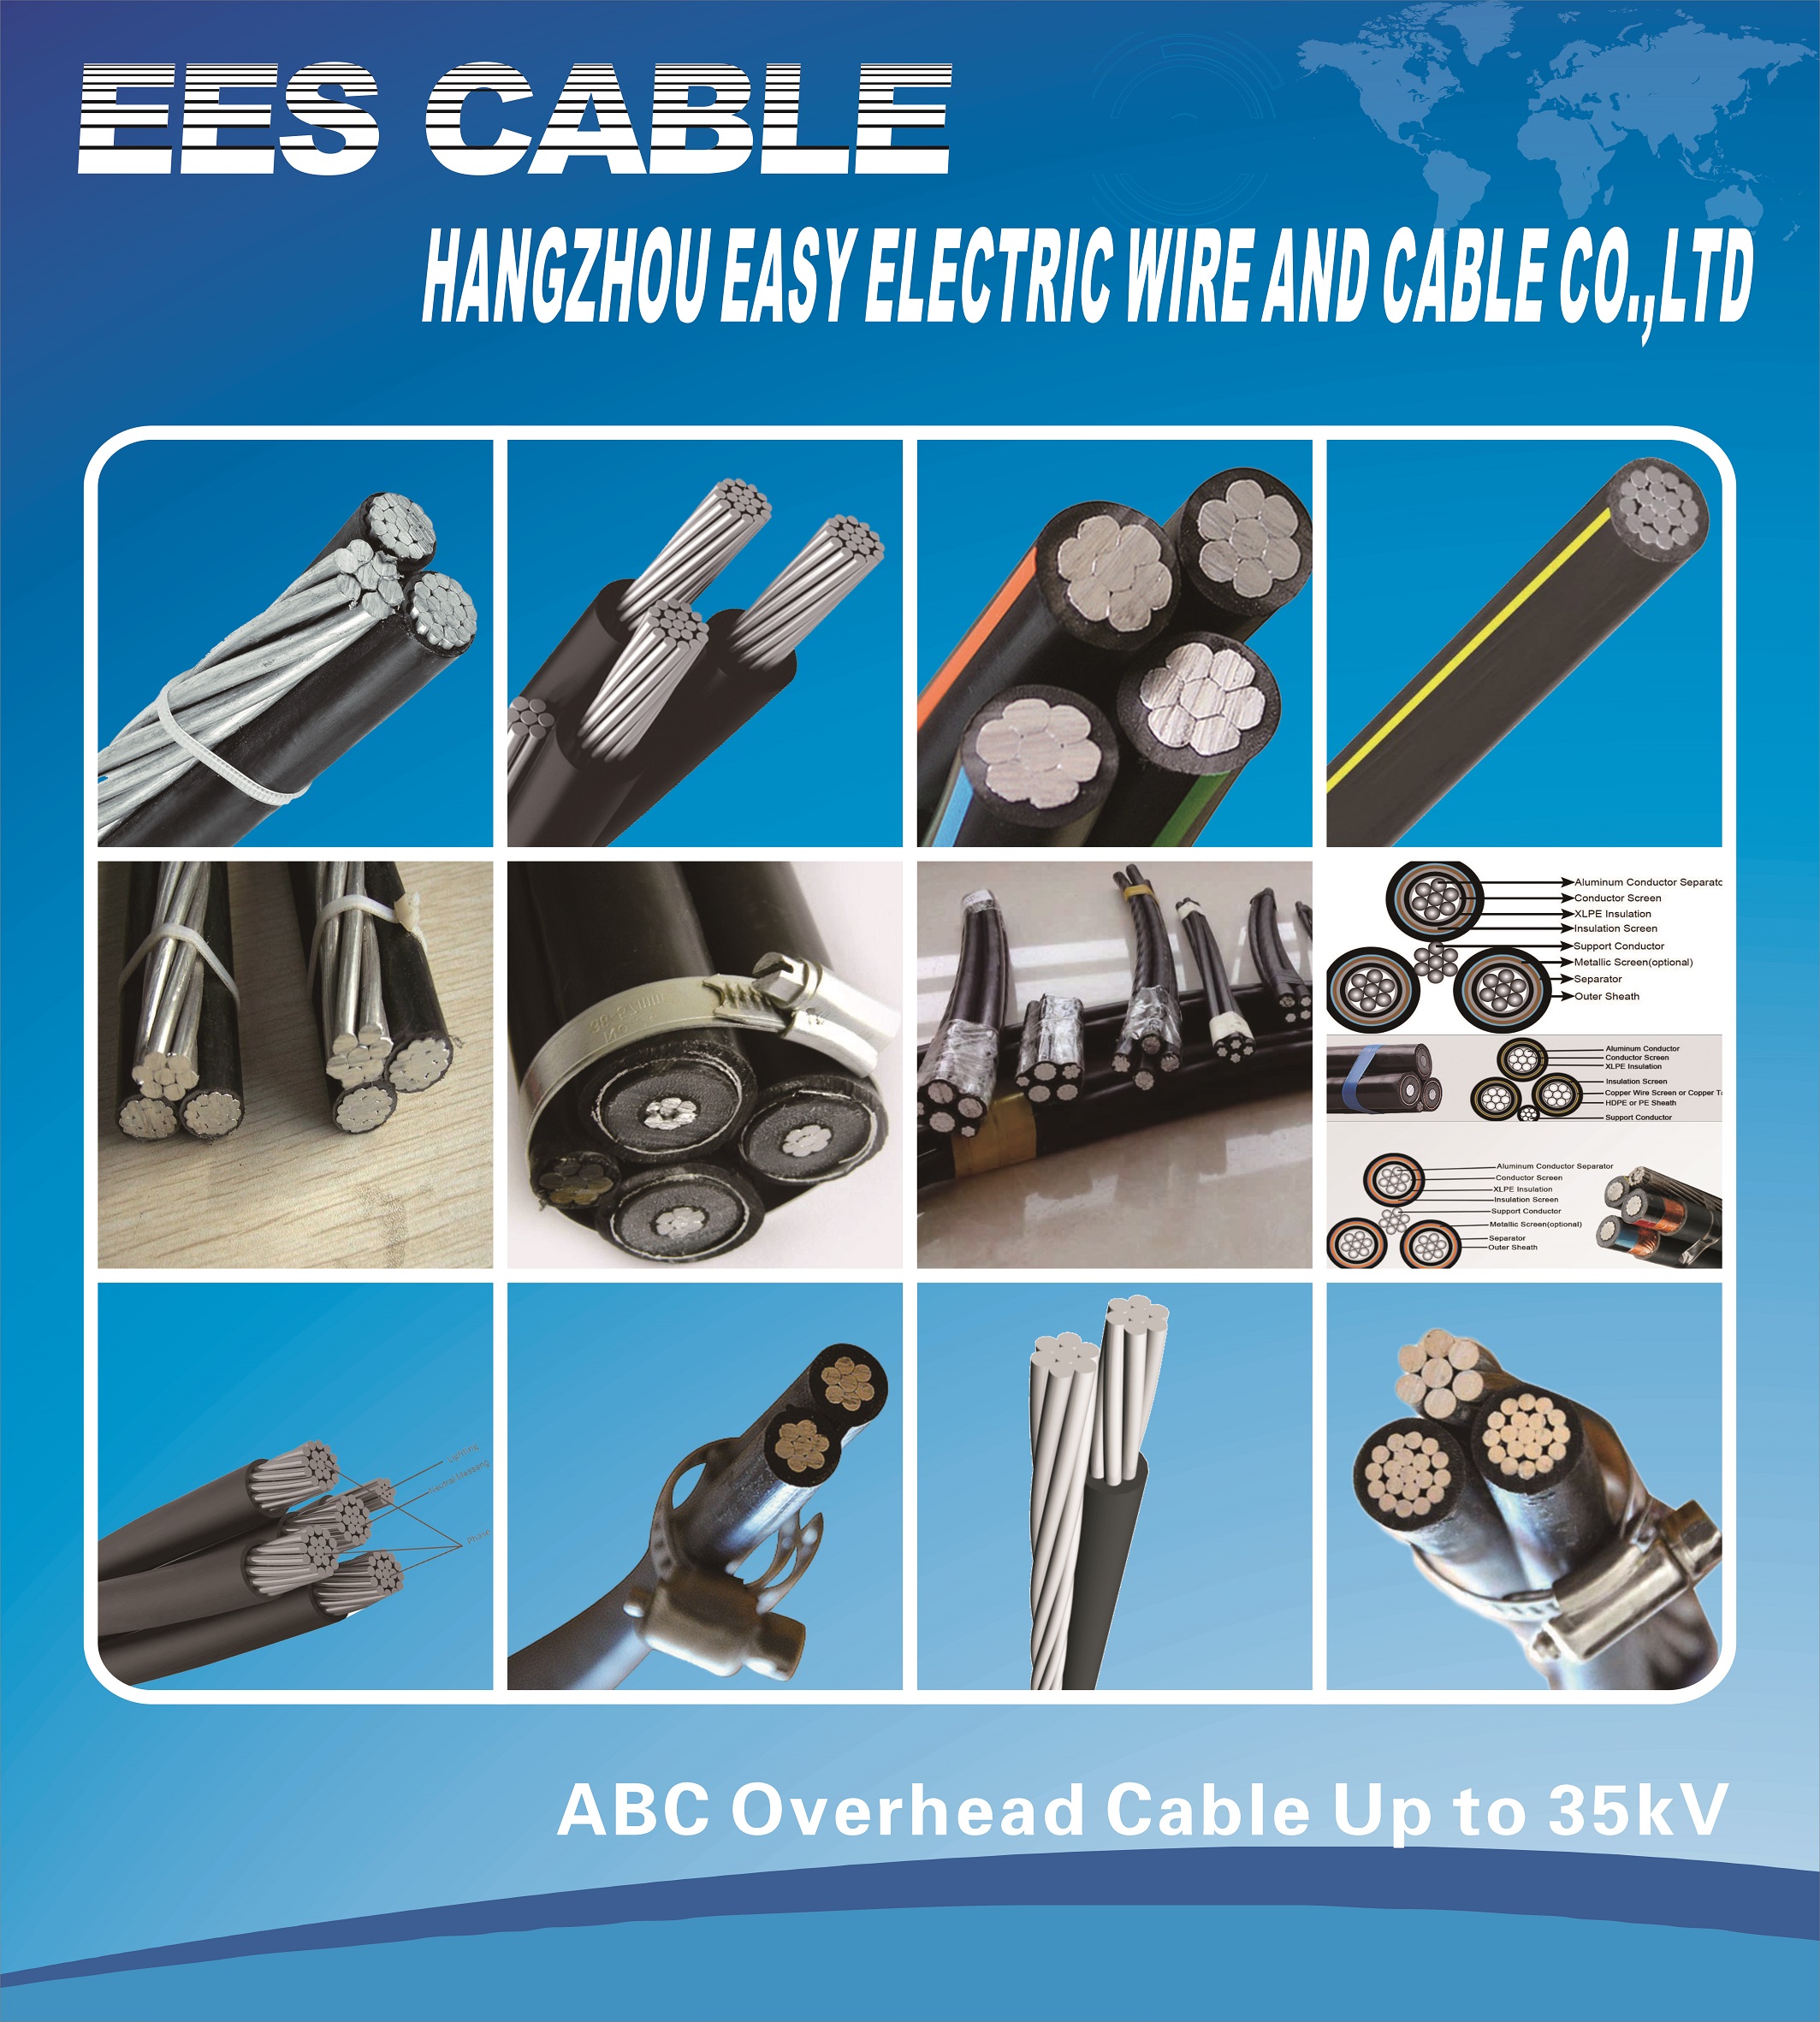 ABC overhead Cable.